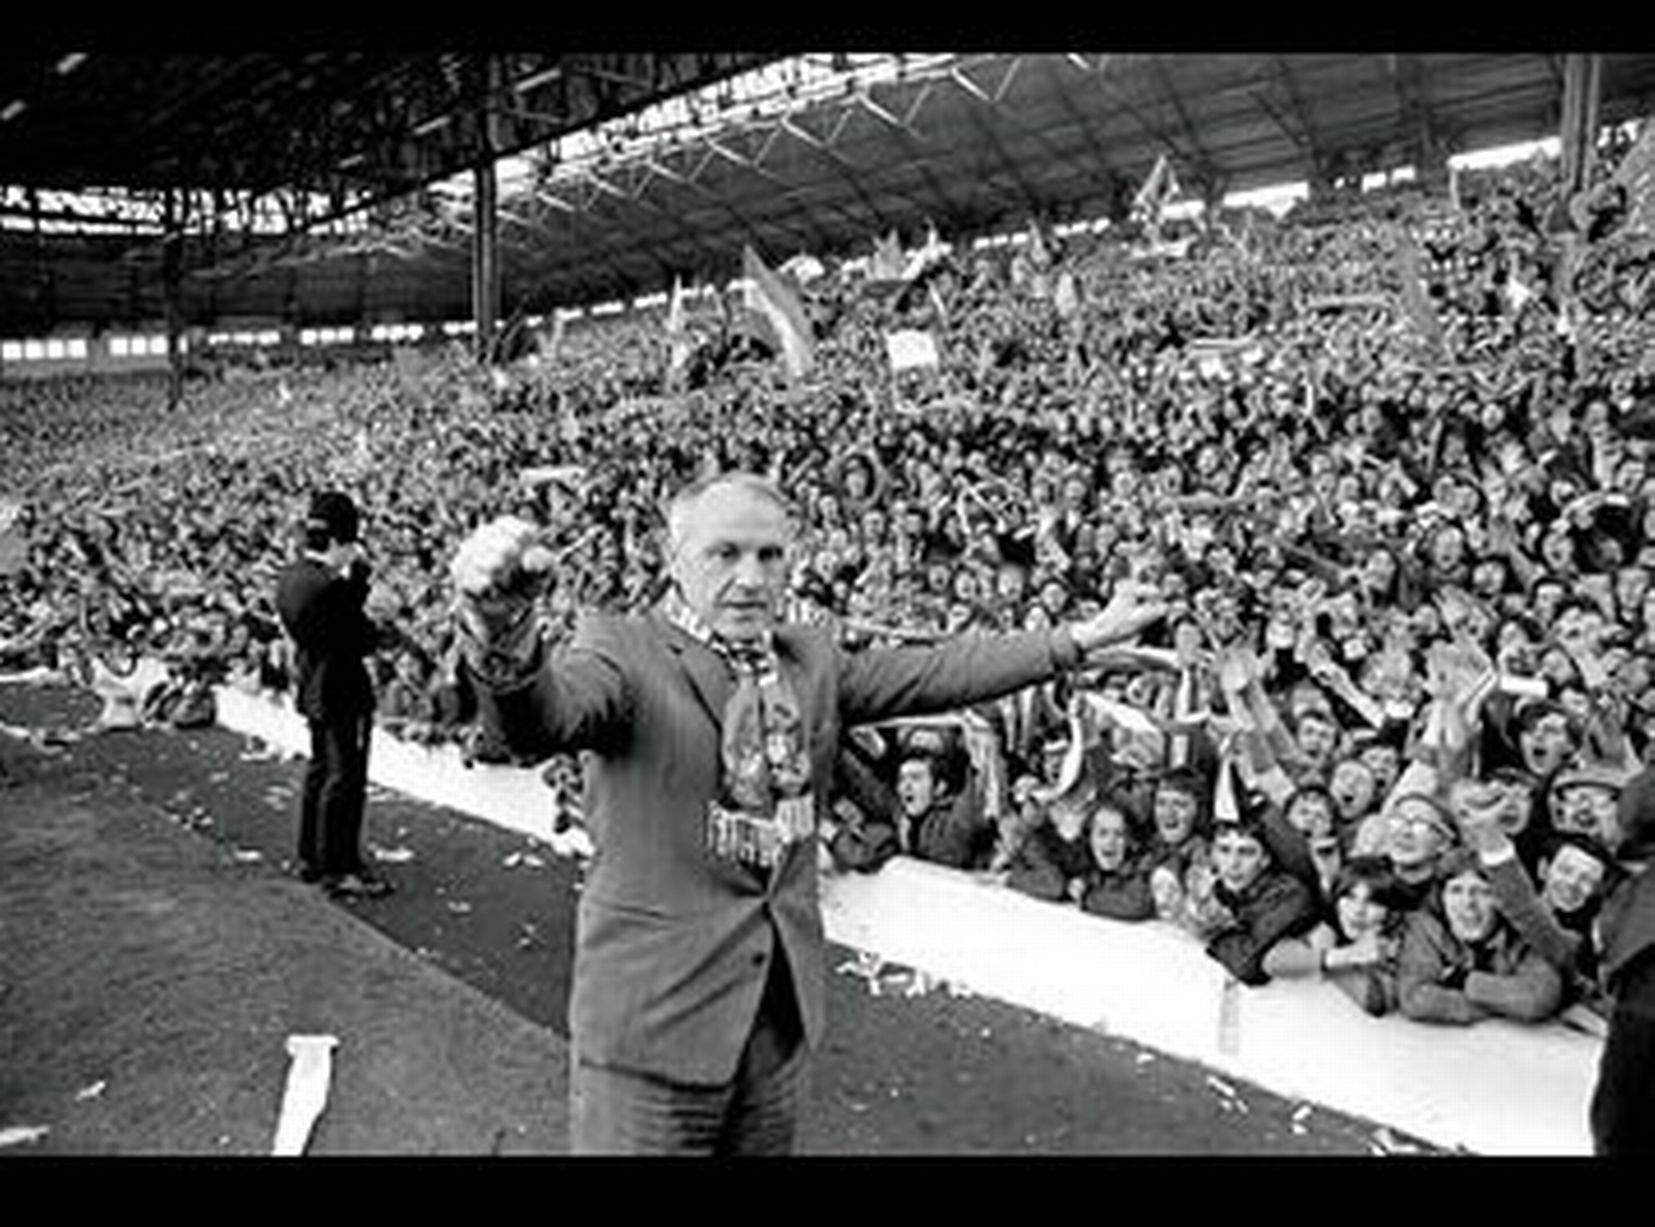 shankly